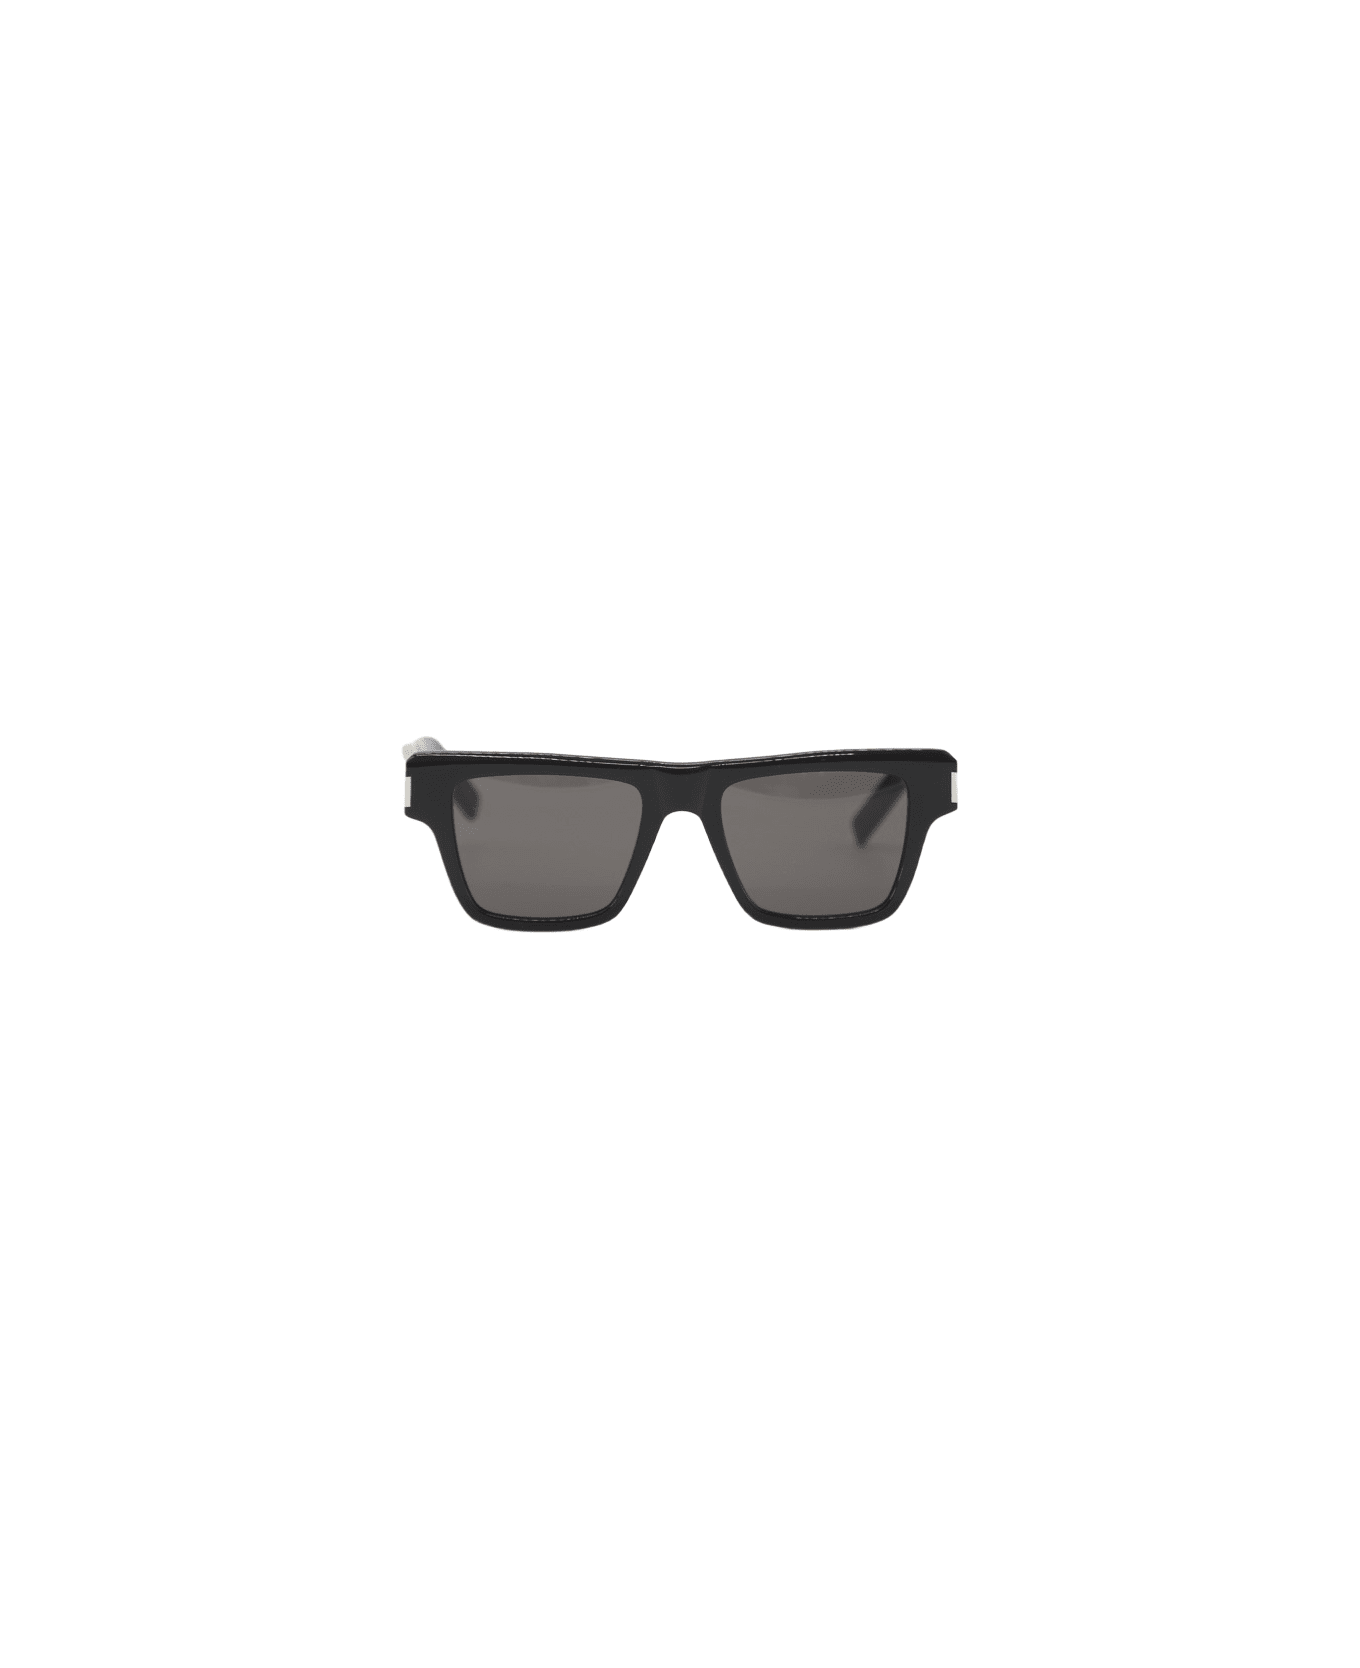 Saint Laurent Sl469 Sunglasses In Acetate With Engraved Logo On Temples - Black